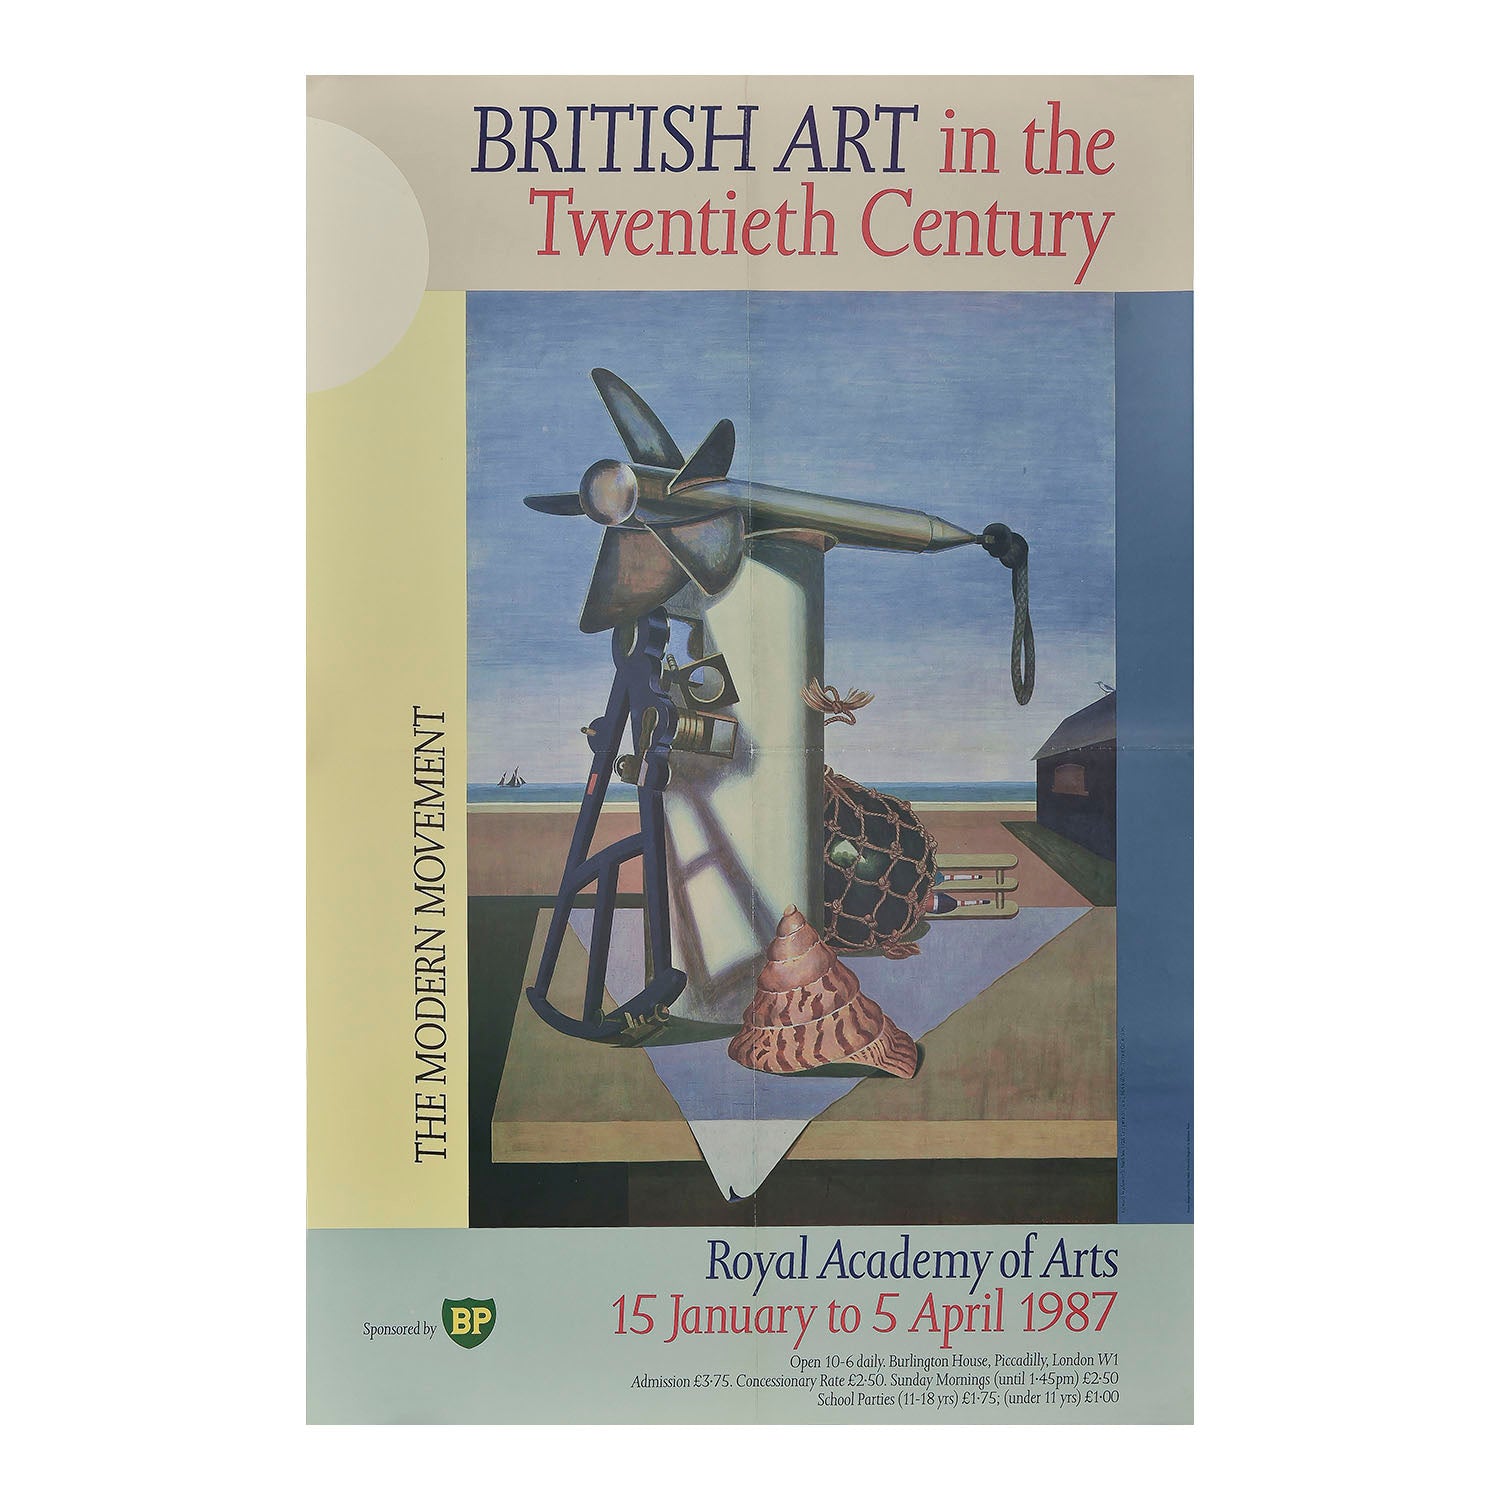 Original art exhibition poster, British Art in the Twentieth Century. The Modern Movement, designed by Philip Miles for the Royal Academy, 1987. The design features North Sea (1928), by the British Modernist artist Edward Wadsworth.